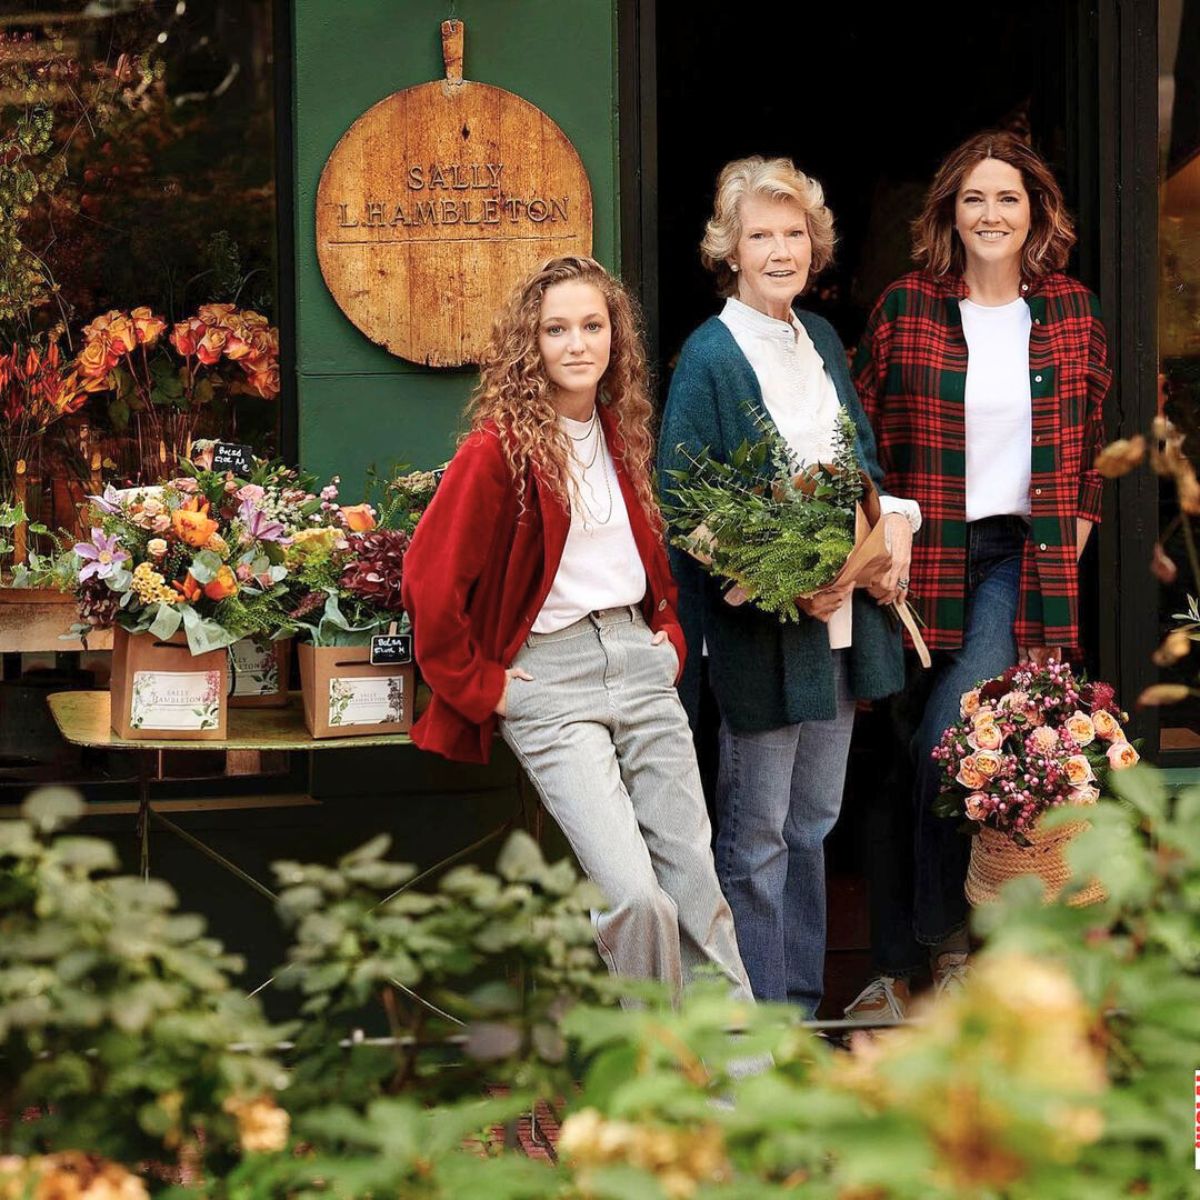 Sally Hambletons three generations working at the flower shop